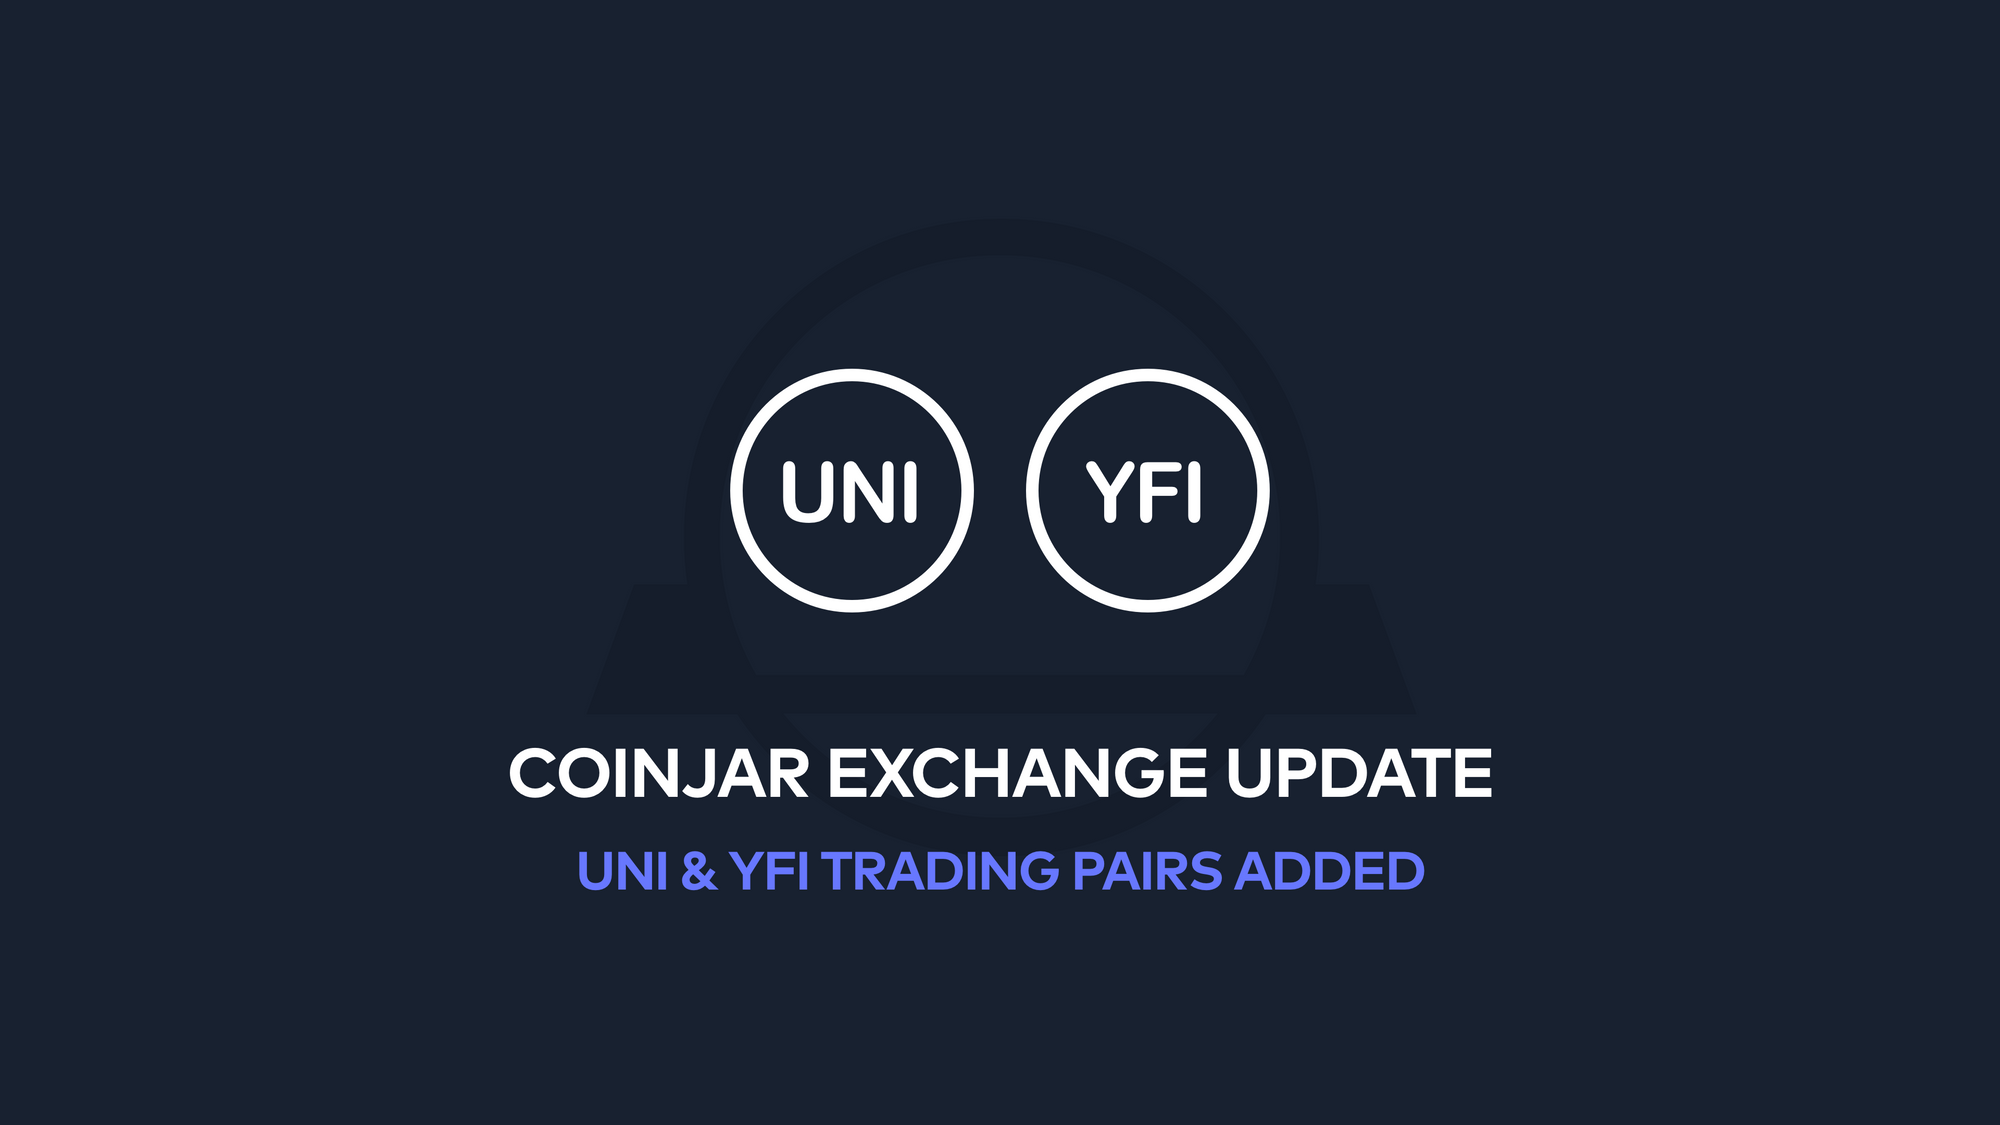 UNI and YFI are now available for trading on CoinJar Exchange!